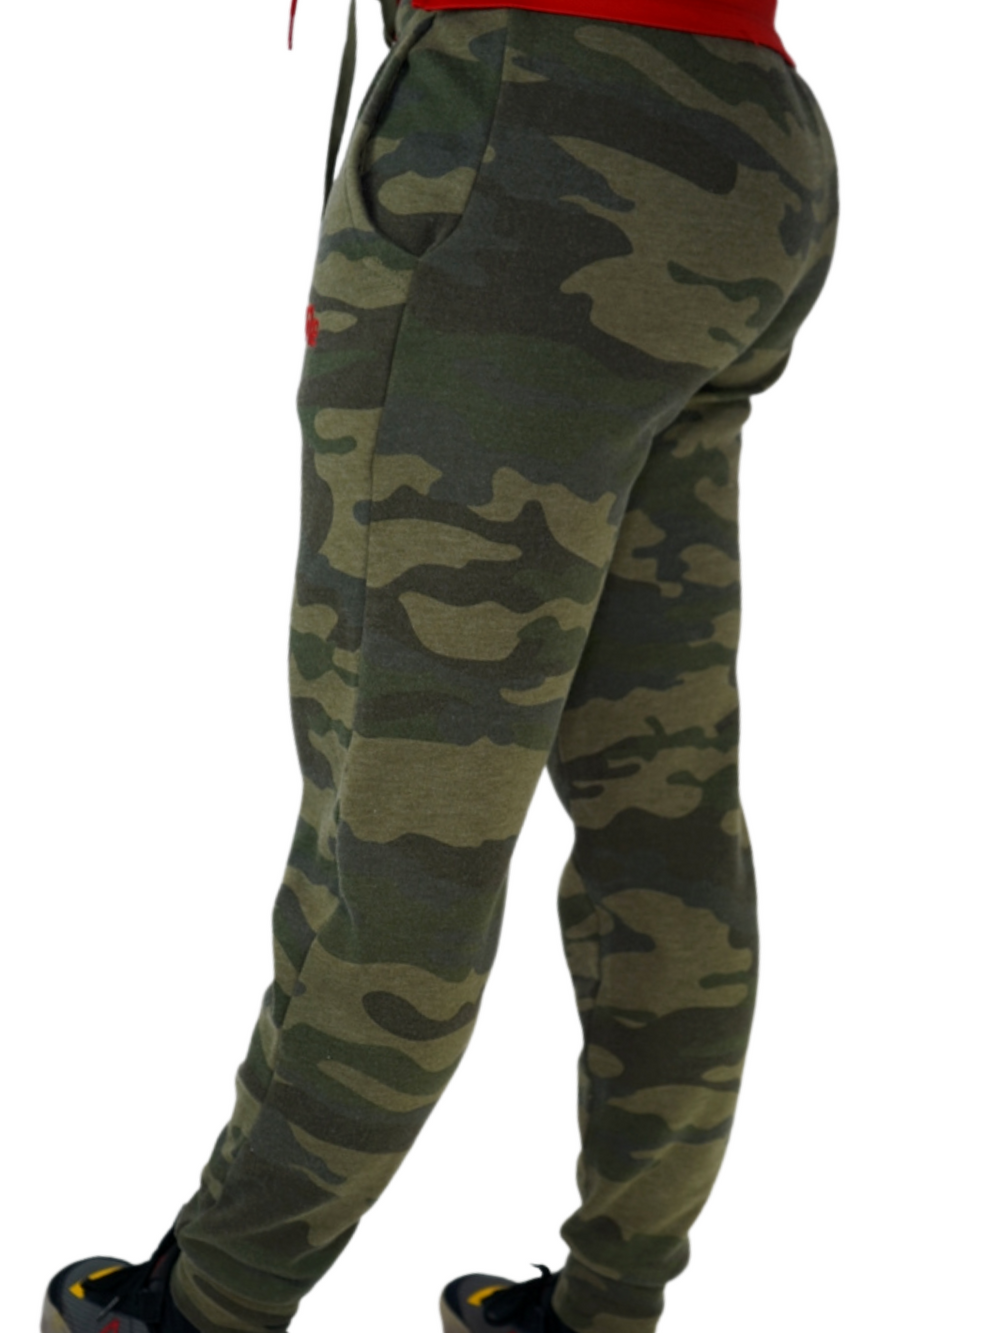 The perfect Green camouflage sweat pant material for your lounging needs. Featuring Red GODinme logo at left thigh, live in comfortable softness while representing your Faith!